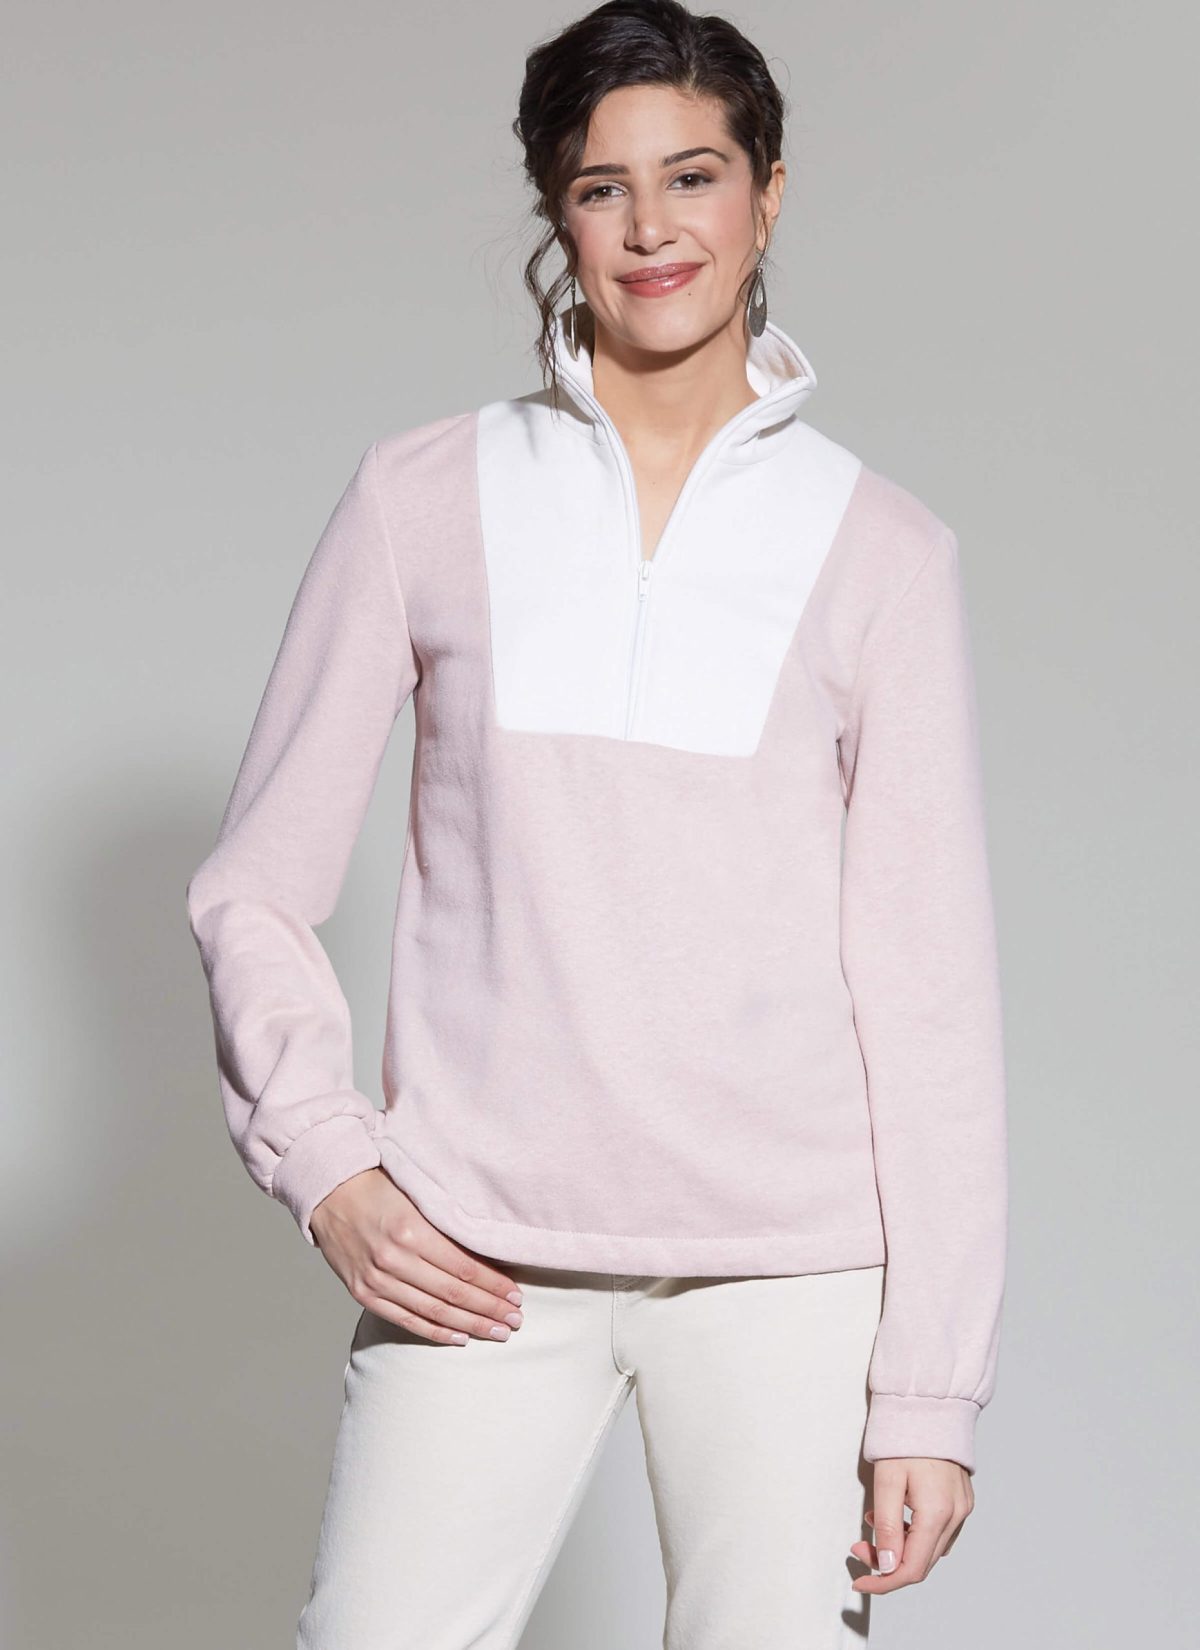 McCall's Sewing Pattern M8343 Misses' Pull-Over Tops